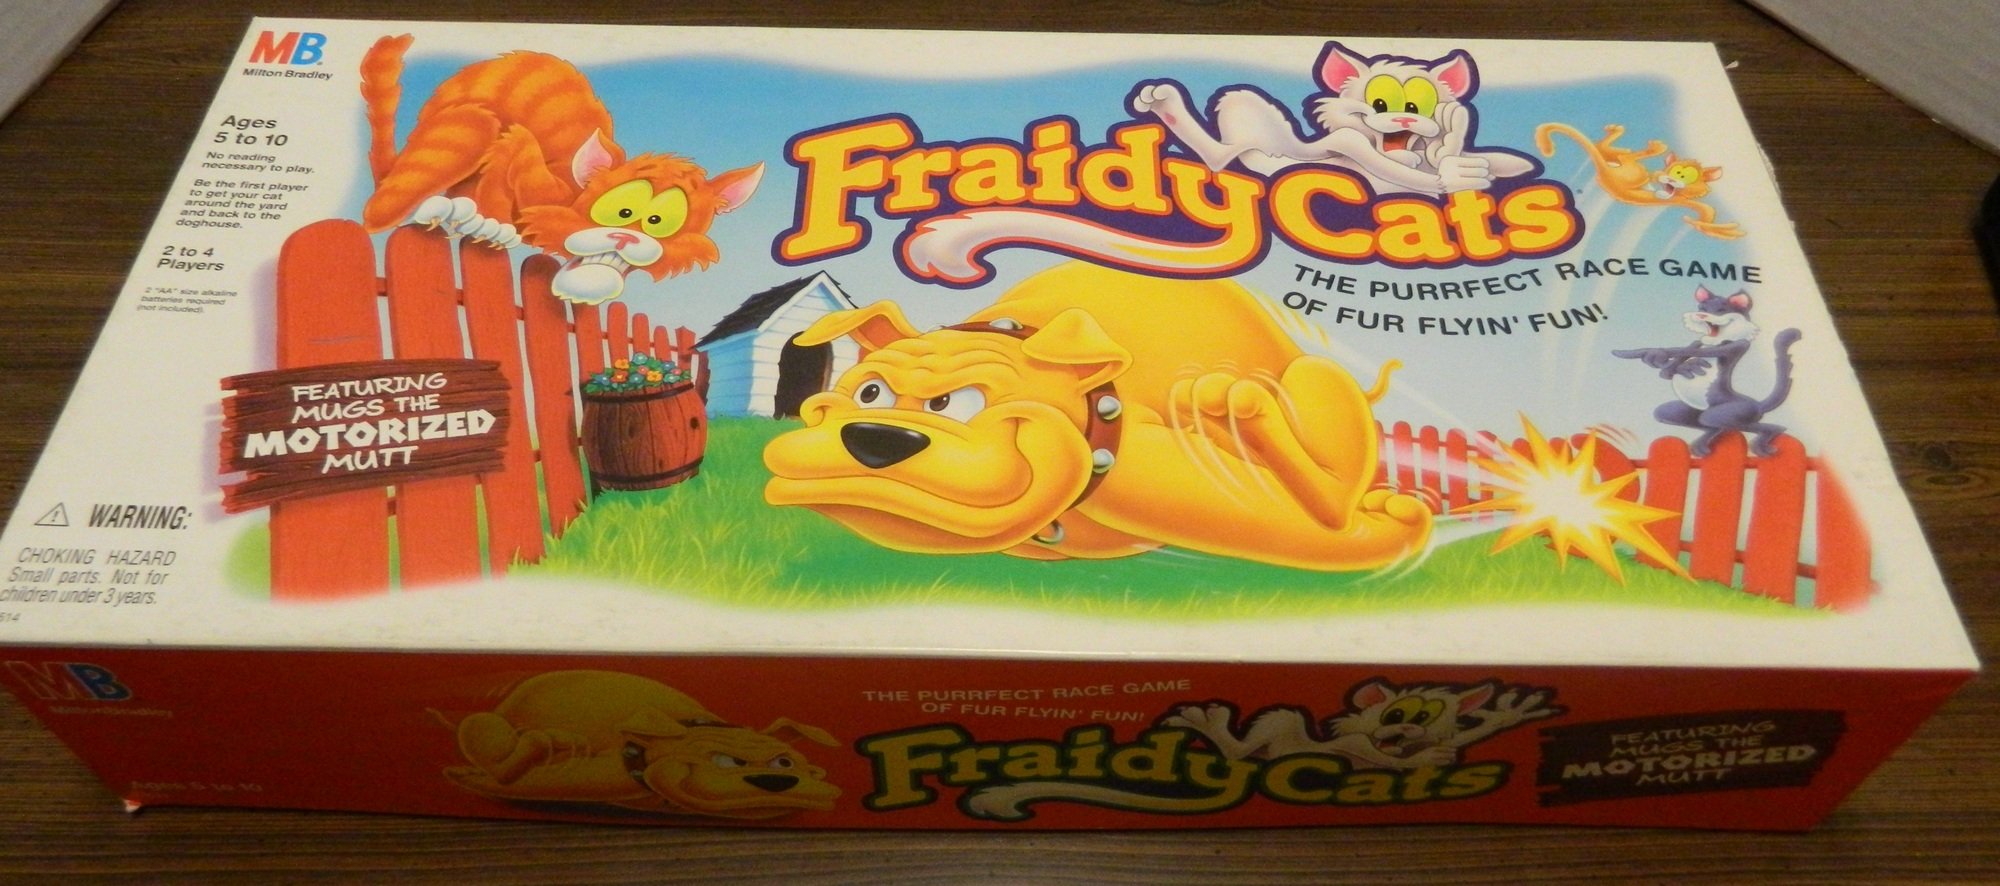 Box for Fraidy Cats